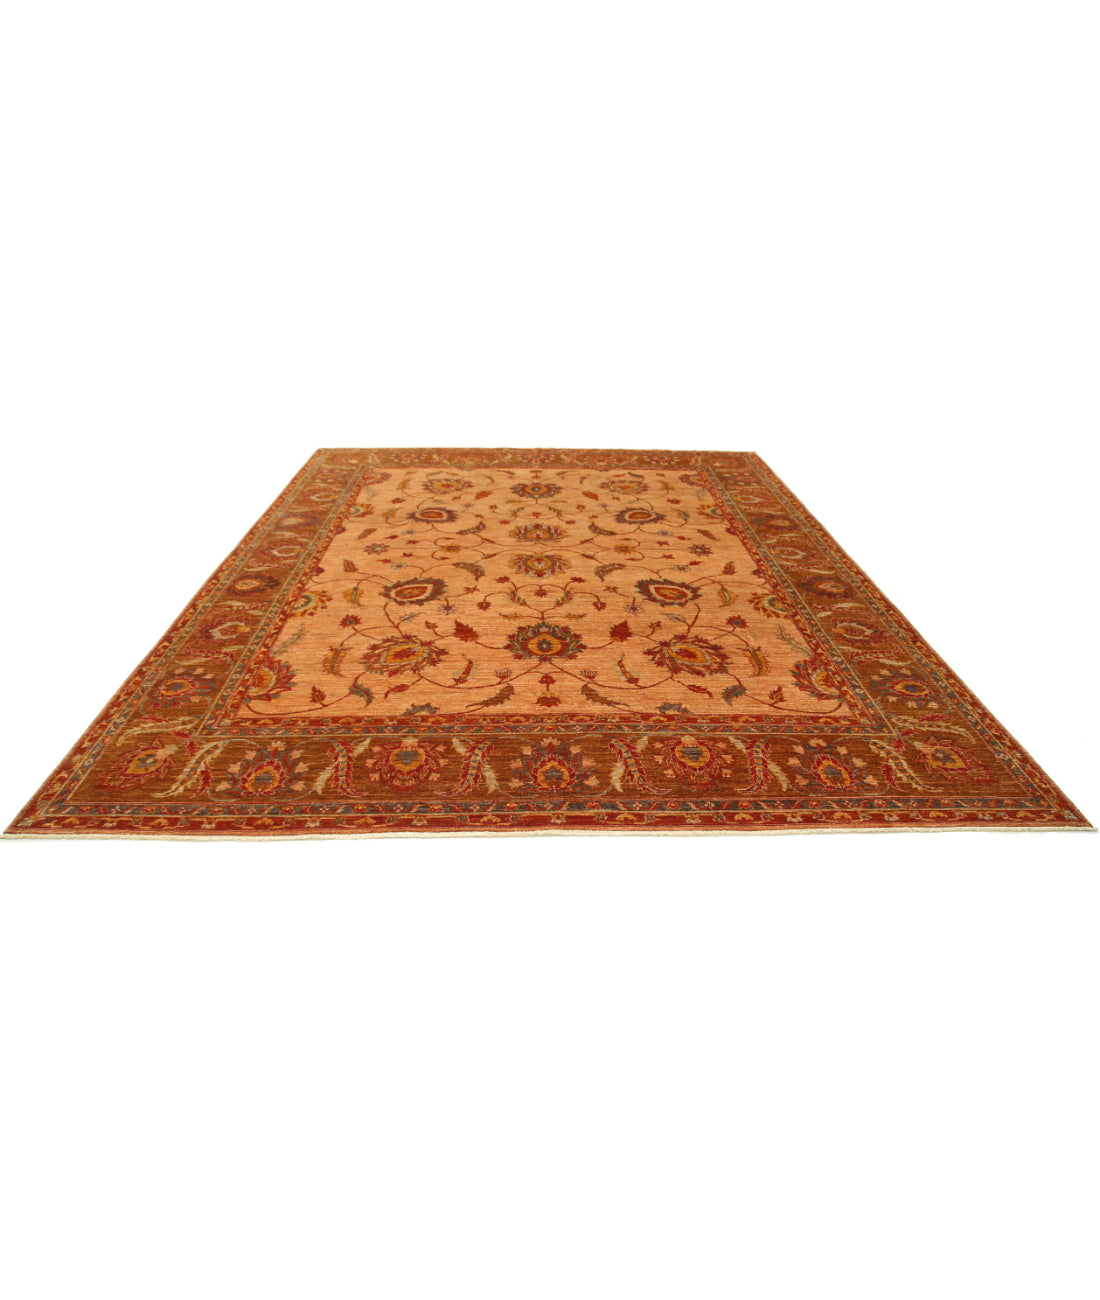 Hand Knotted Nomadic Caucasian Humna Wool Rug - 10'8'' x 13'10'' 10'8'' x 13'10'' (320 X 415) / Tan / Brown